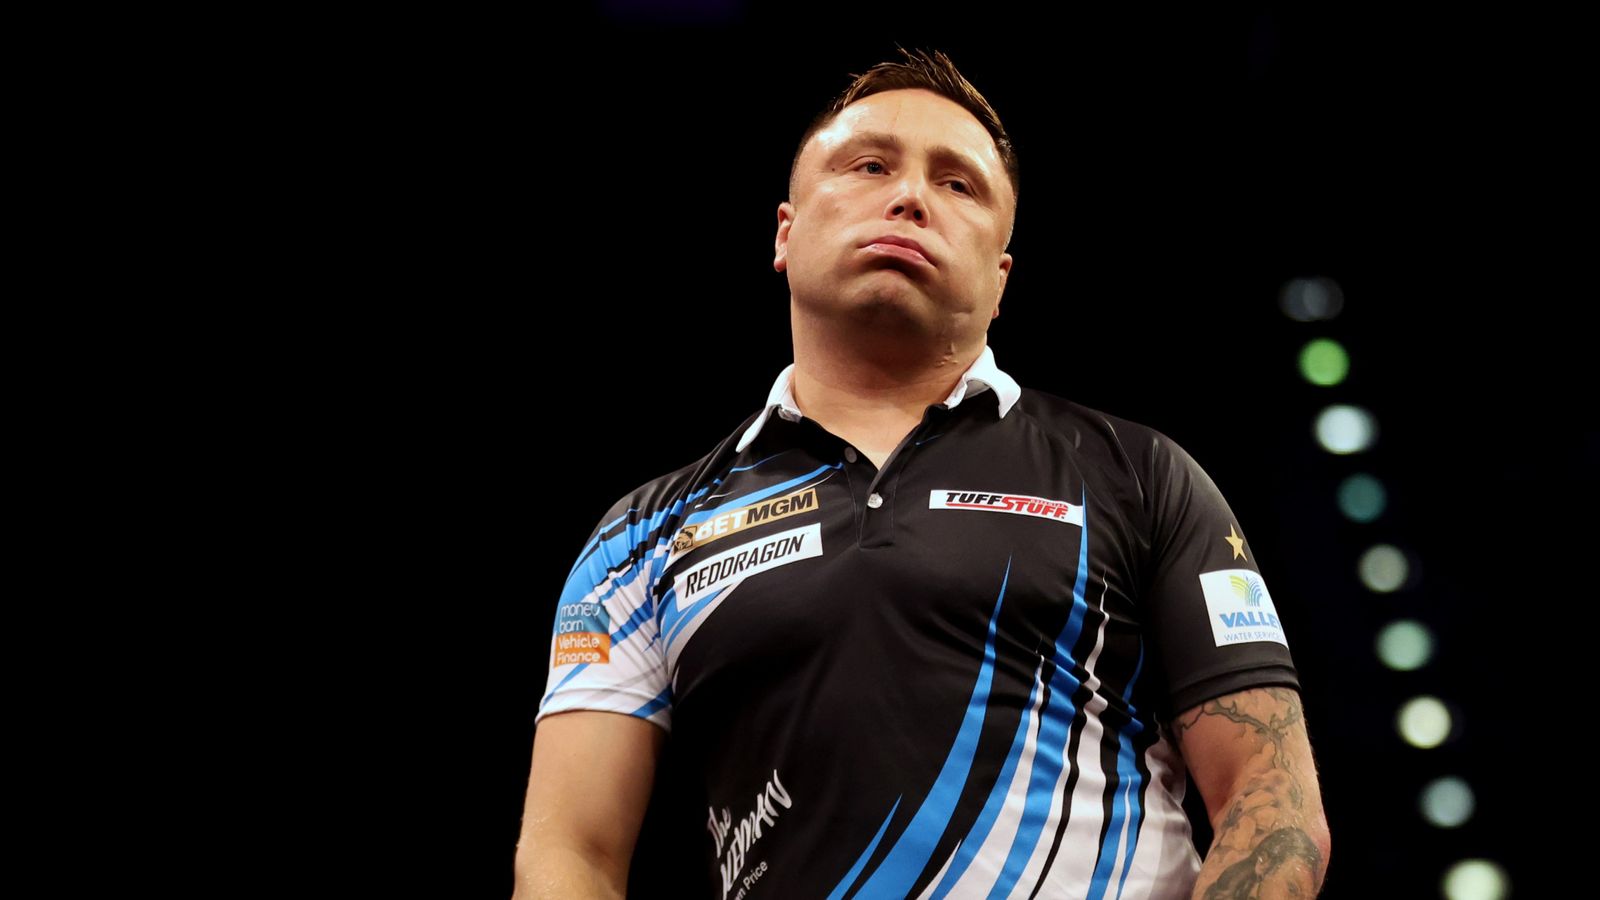 Gerwyn Price withdraws from Premier League Darts in Aberdeen due to back injury | Darts News